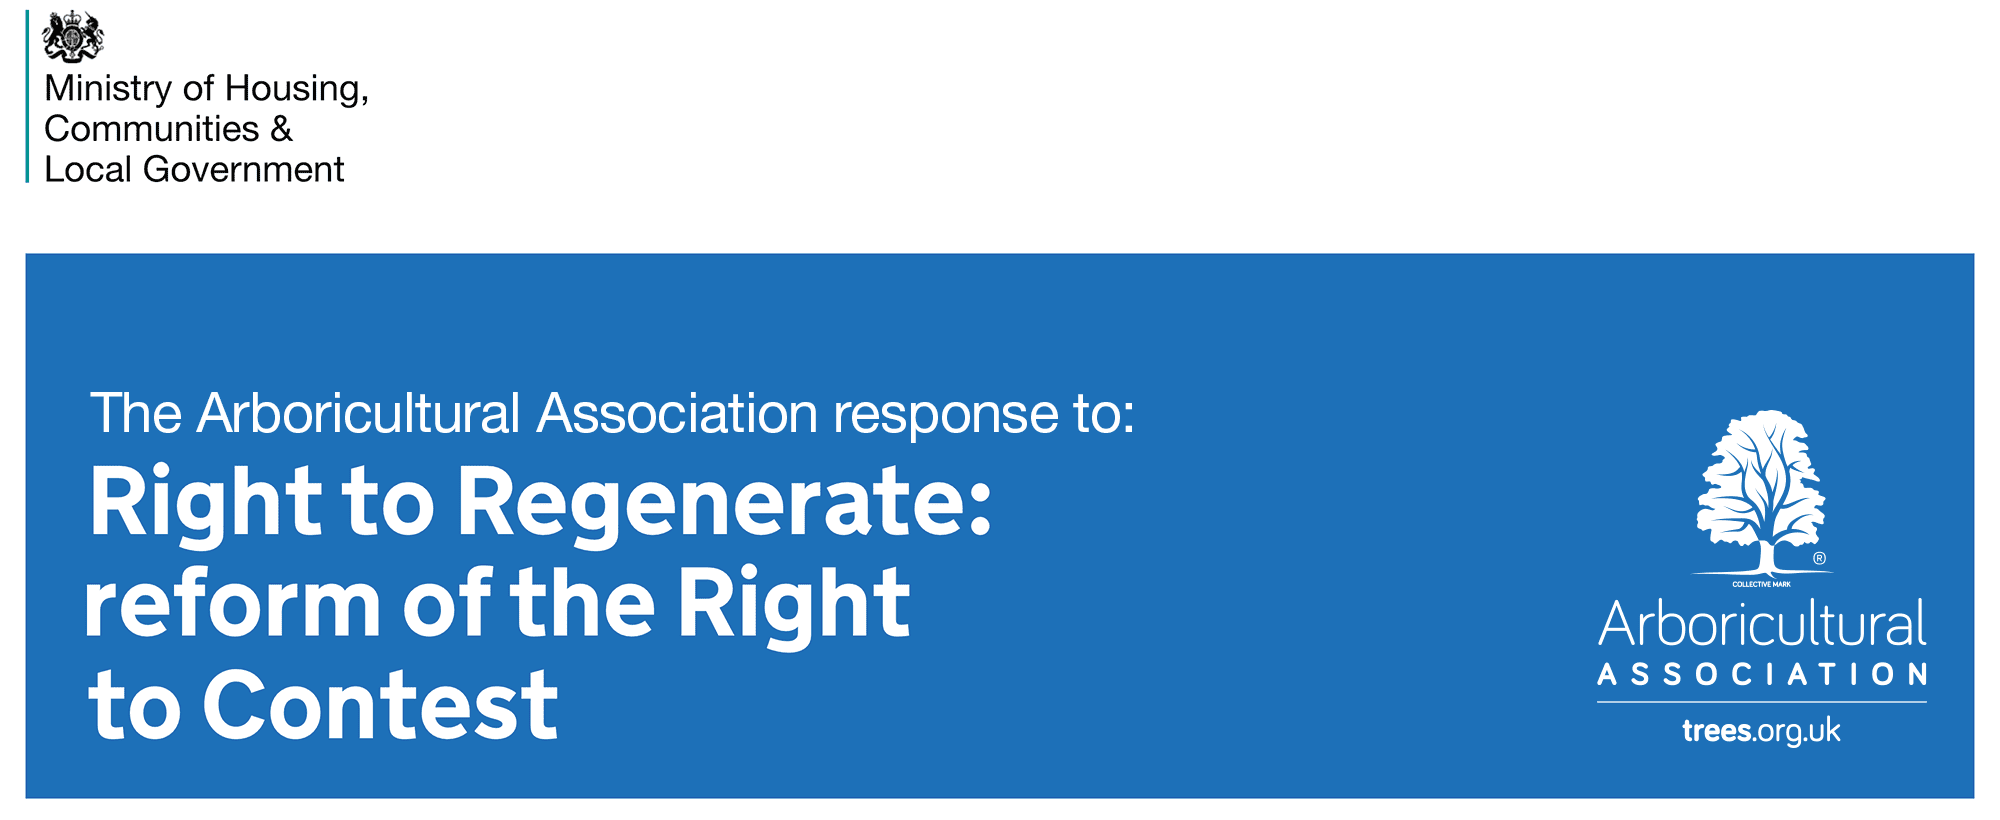 Right to Regenerate: reform of the Right to Contest